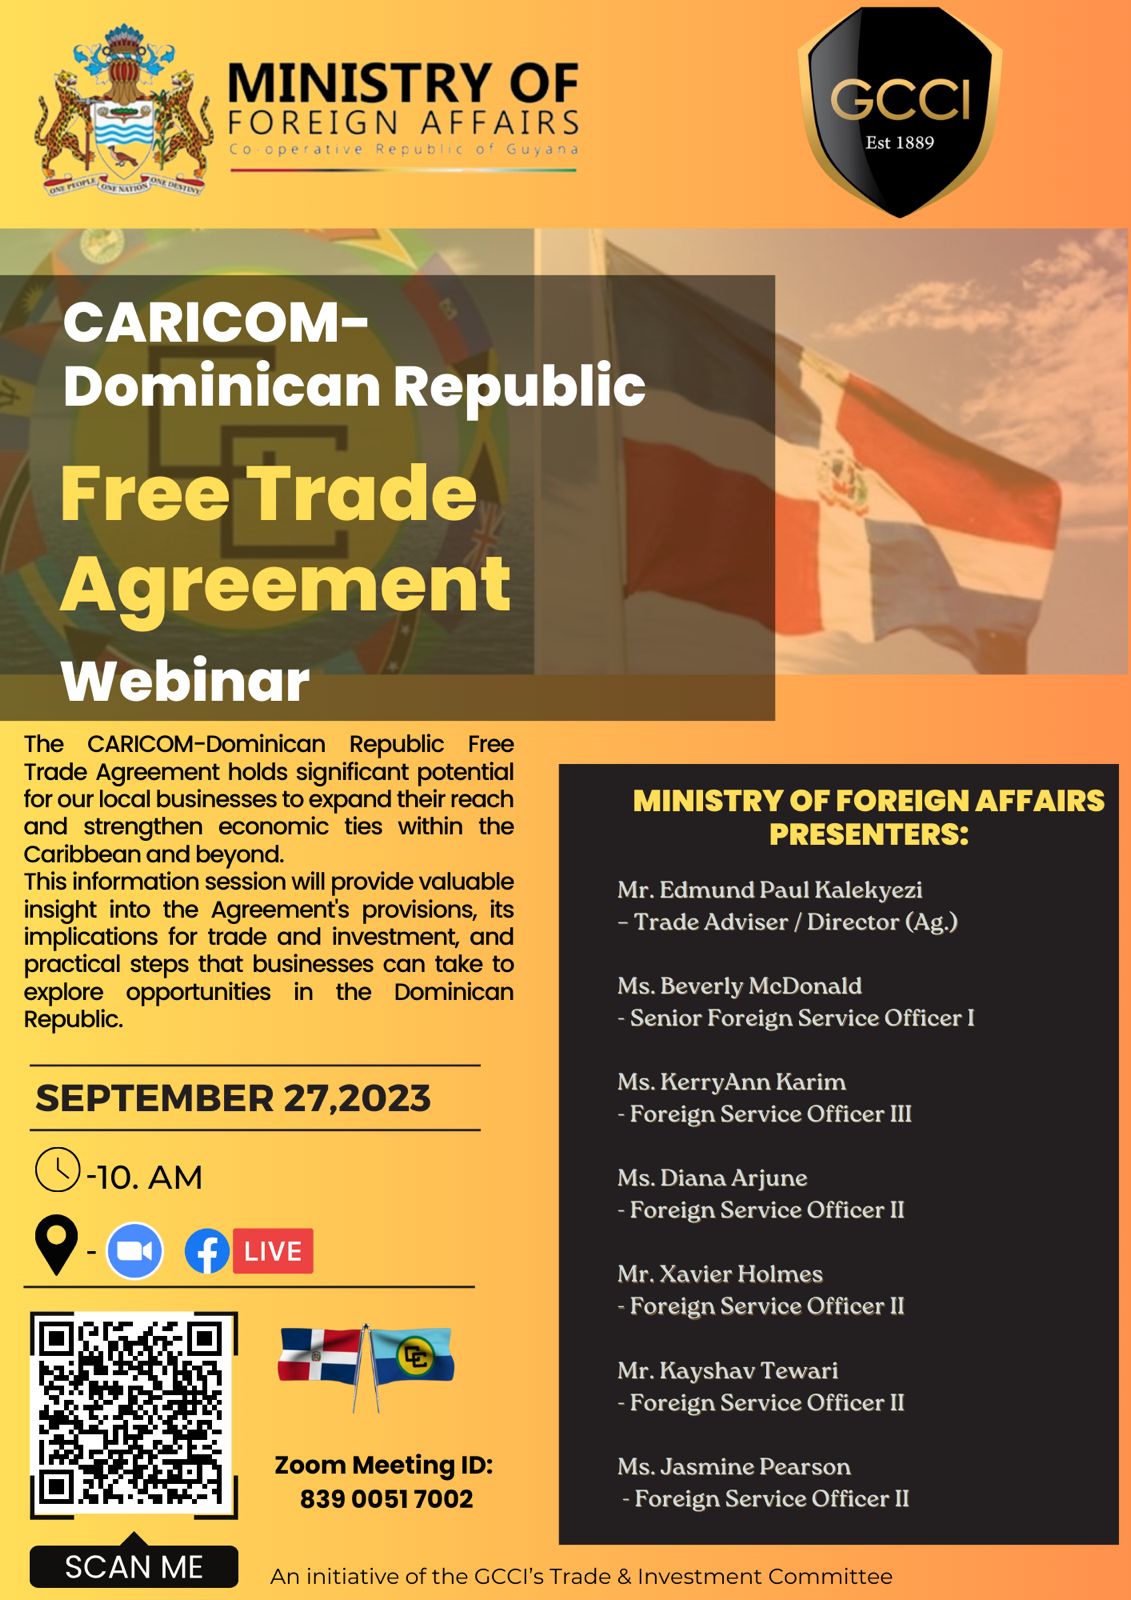 Ministry of Foreign Affairs on the CARICOM-Dominican Republic Free Trade Agreement